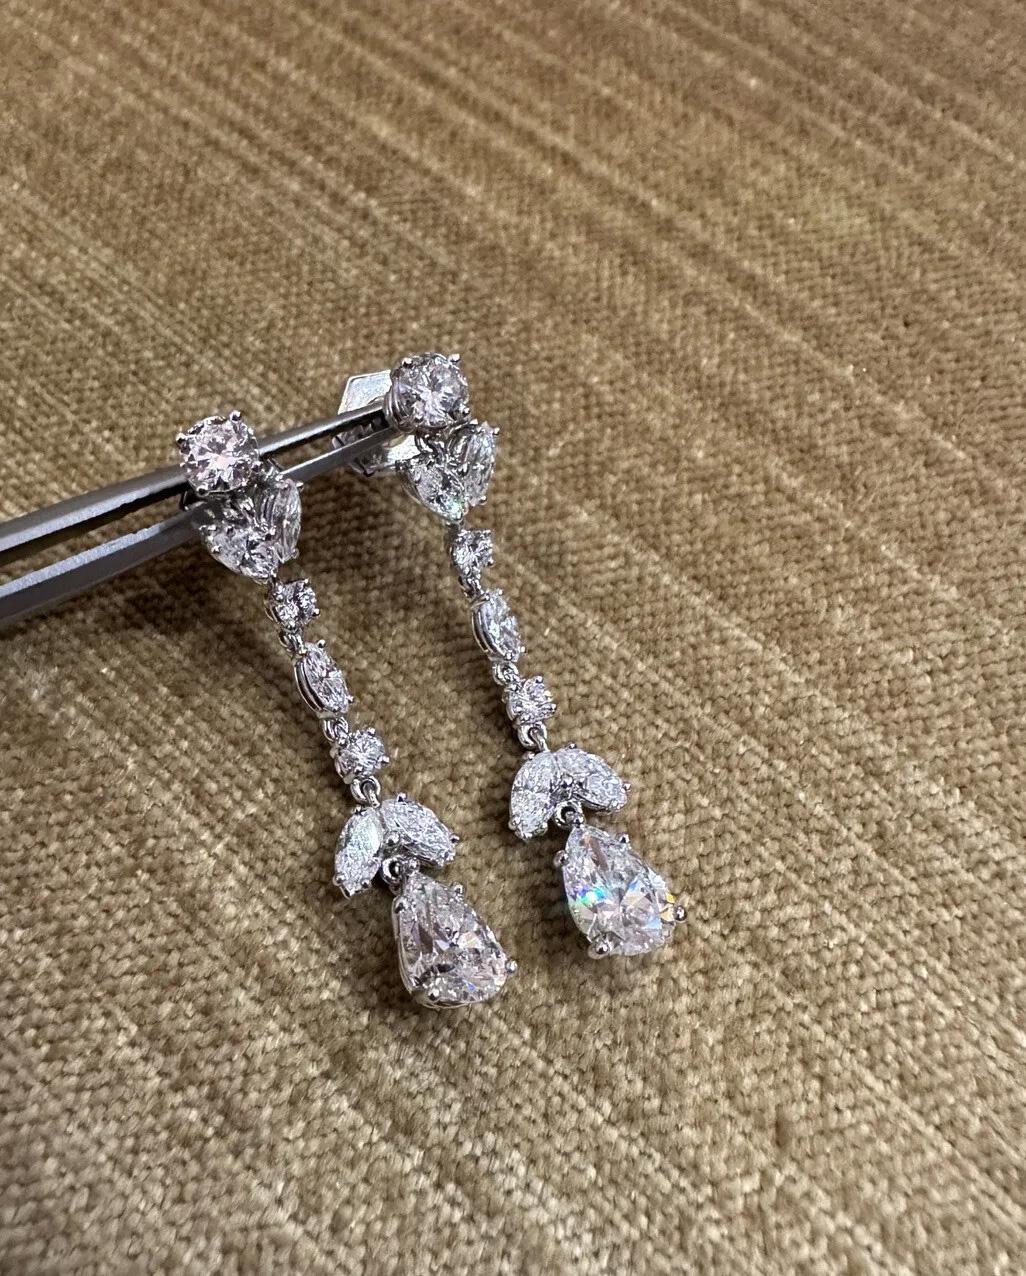 Long Diamond Drop Earrings with Pear Shapes in 18k White Gold and Platinum

Diamond Drop Earrings feature Round Brilliant, Marquise Brilliant, and Pear shape Diamonds set in 18k White Gold and Platinum. 

Large Pear Diamonds weigh .88 carats and .96